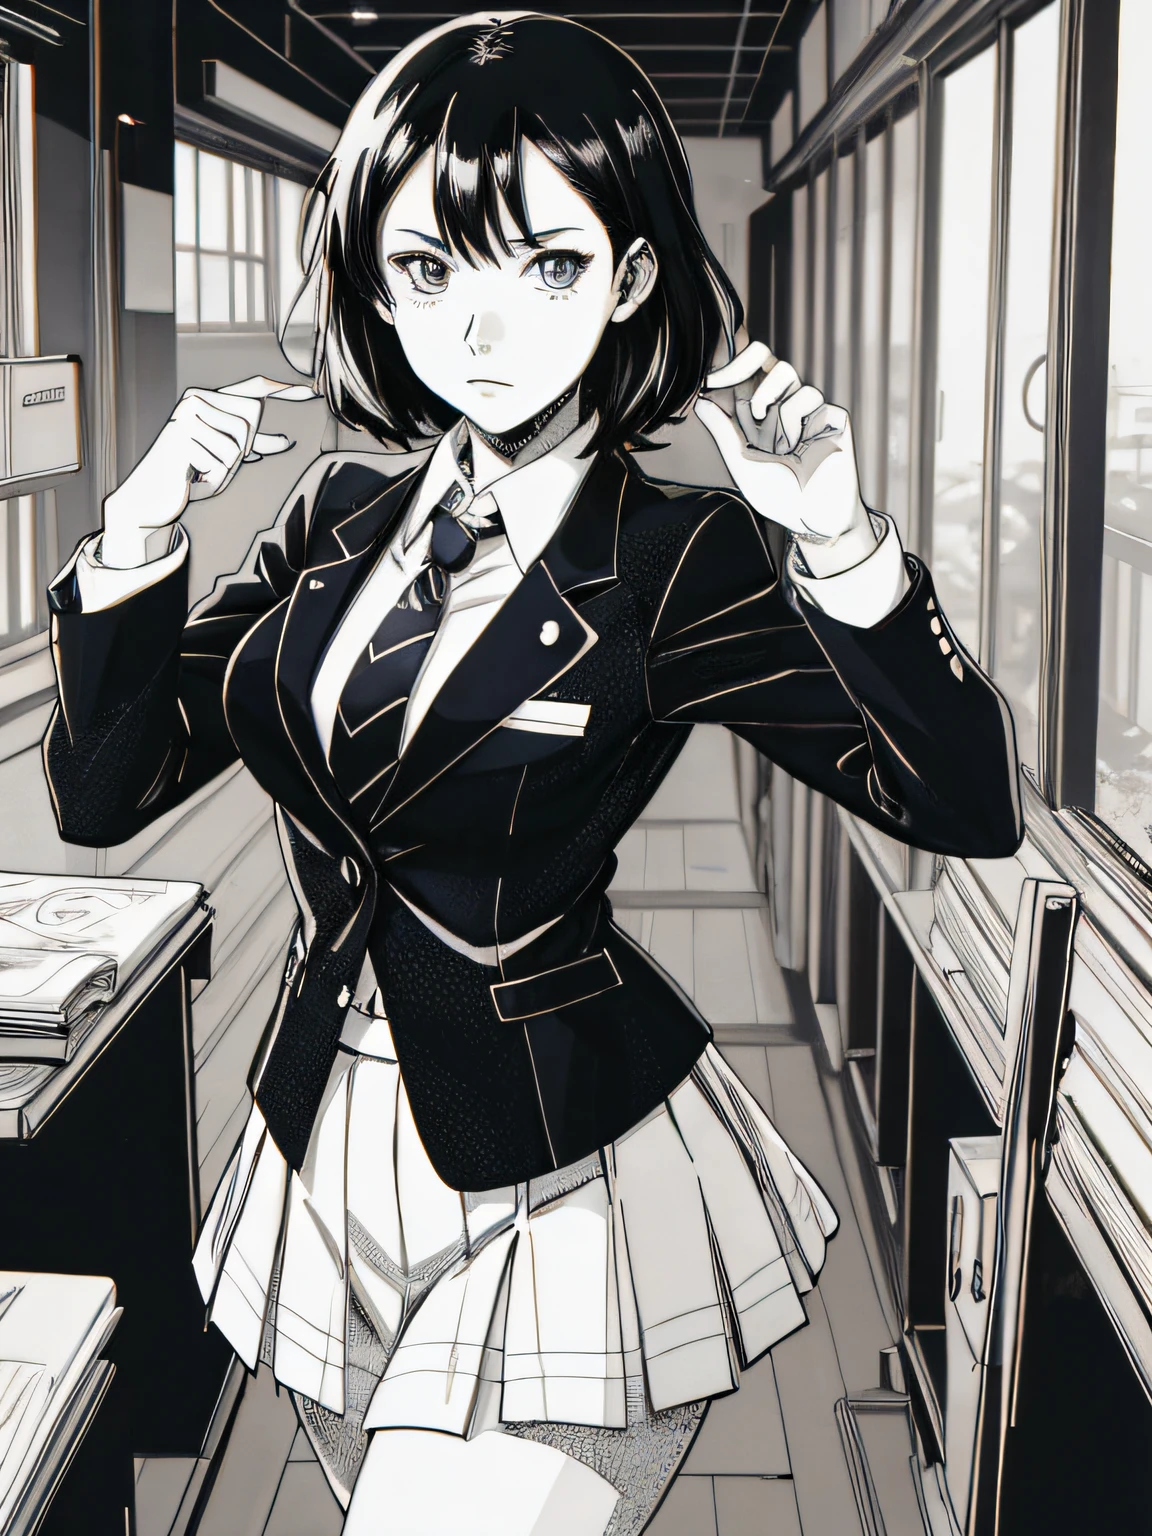 of the highest quality, Best Quality,超A high resolution, hight resolution, (masutepiece), (Comic noir style illustration), (linear art_Anime),(black-and-white:1.0),(monotone_highcontrast),hi-school girl,high-school uniform、neck tie、blazers、skirt by the,Inside the school_the complex background,(lora Add More Detail:0.6)